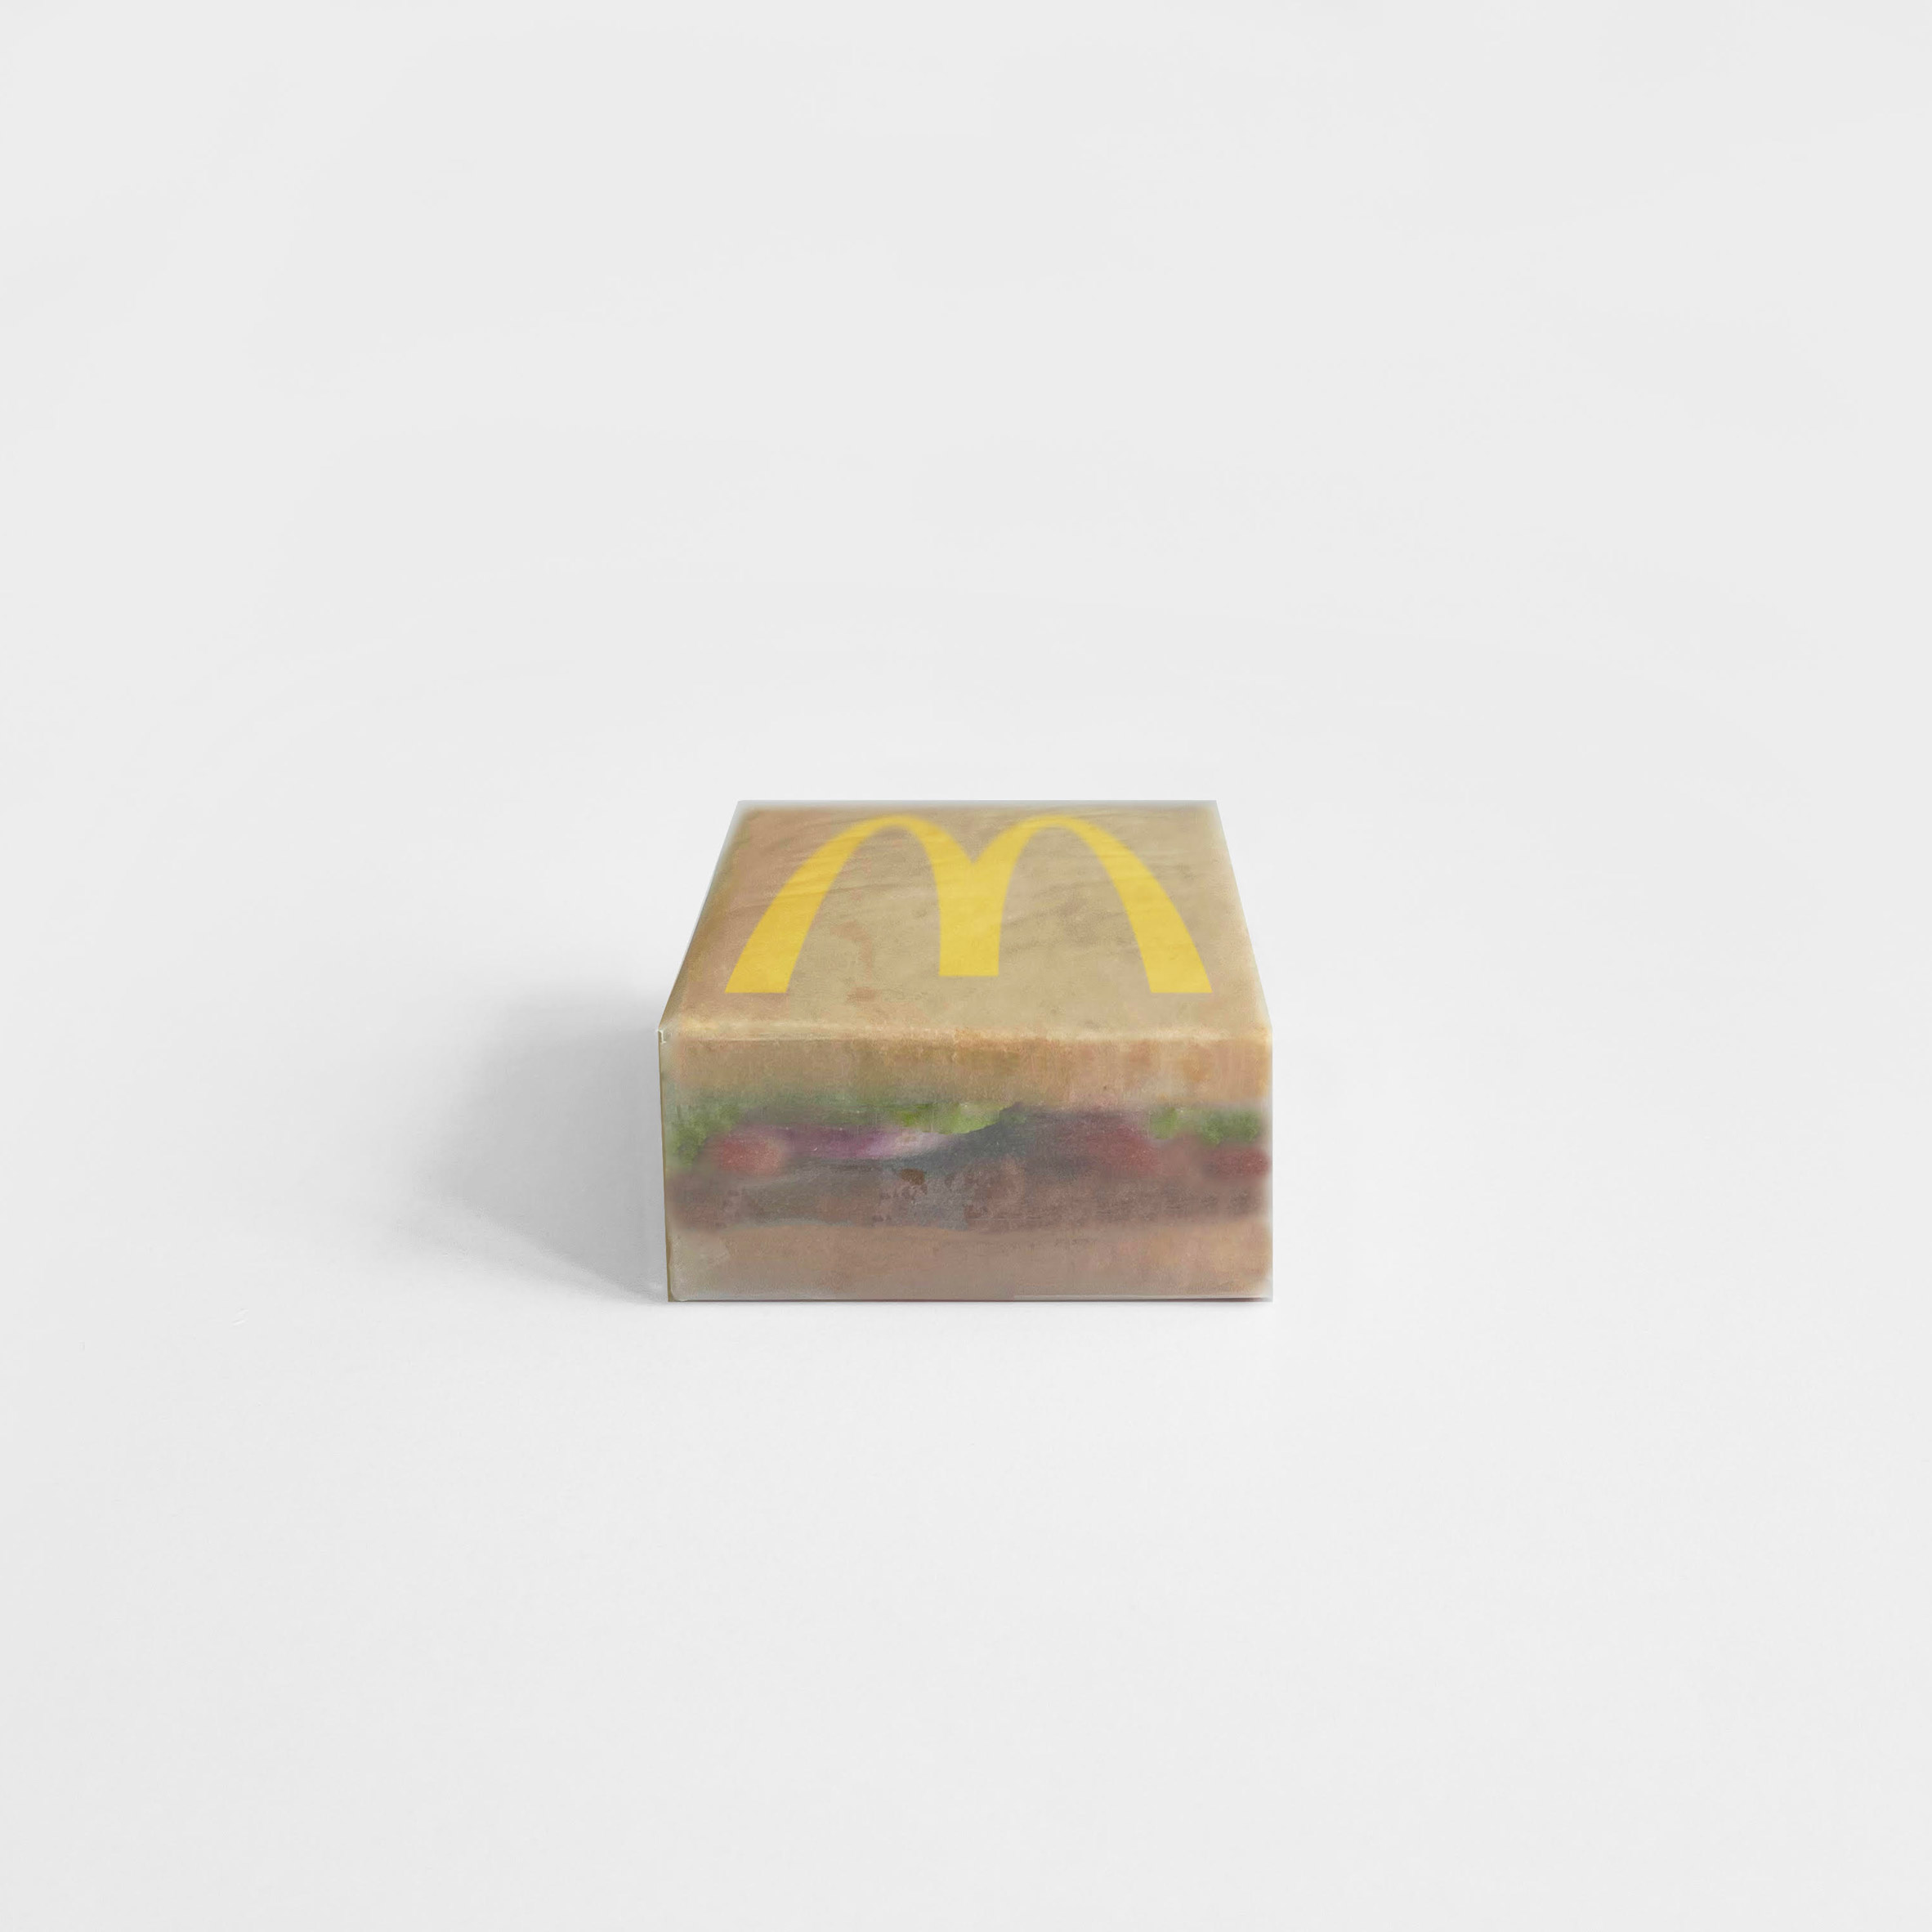 What Are Some Popular Design Trends For Burger Boxes?